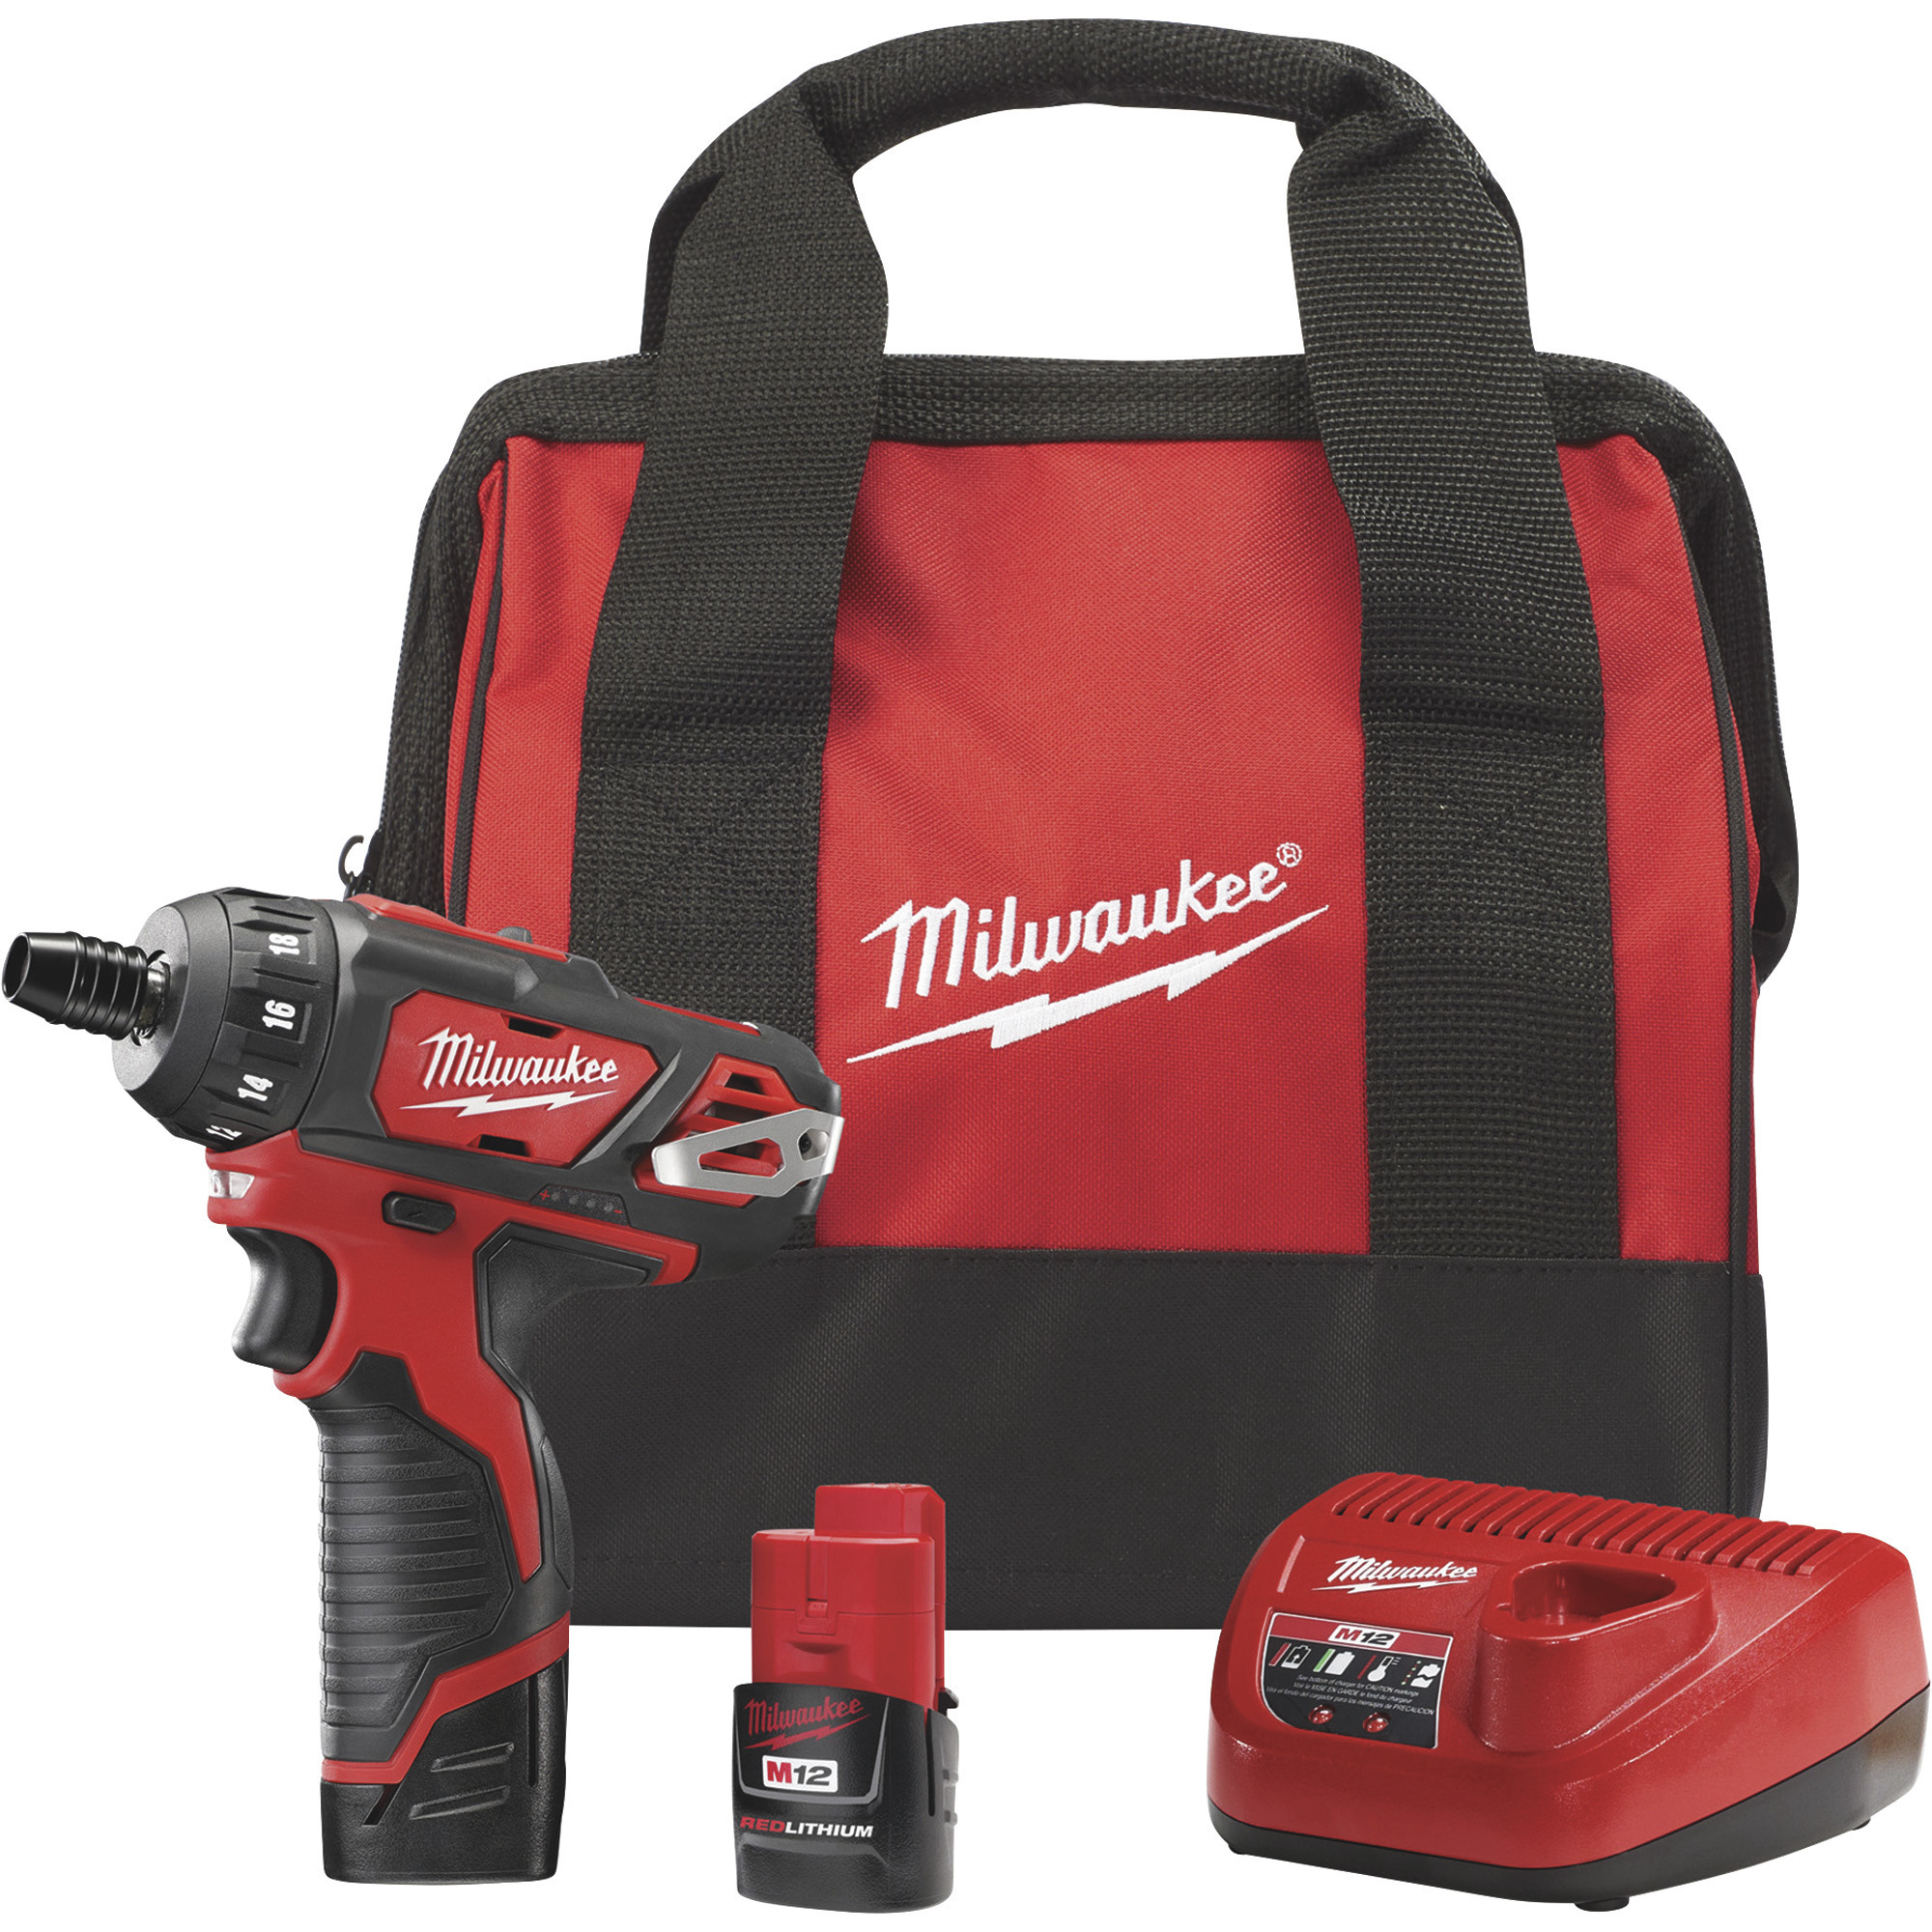 Milwaukee M12 Lithium-Ion Cordless 2-Speed Screwdriver Kit With 2 Batteries, 1/4Inch Hex, 1500 RPM, Model 2406-22